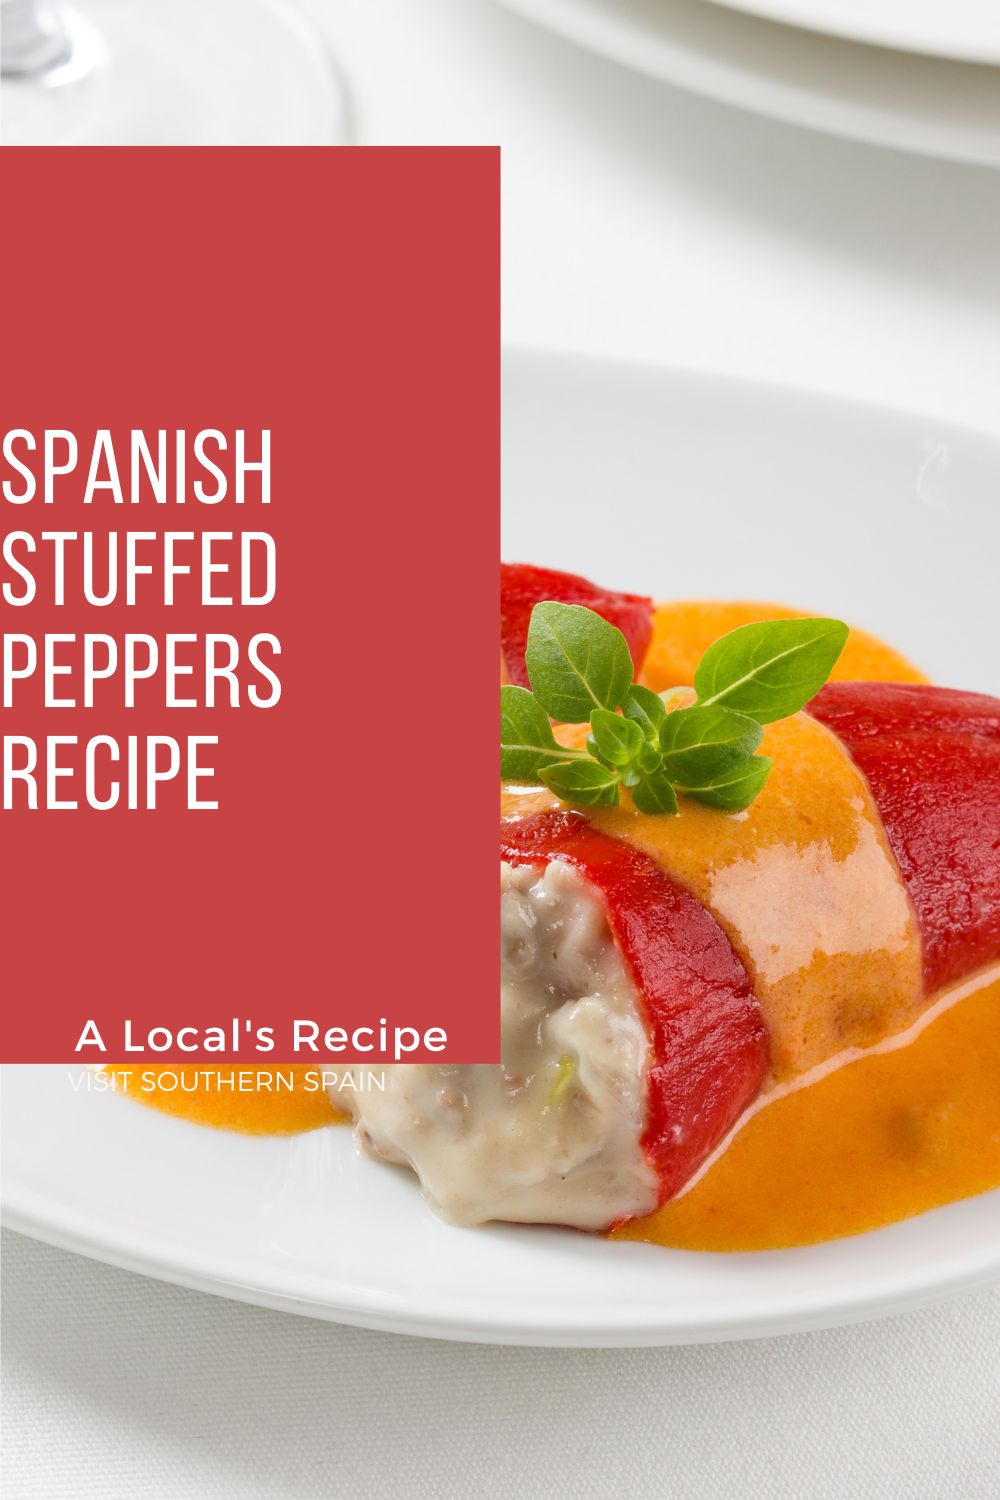 Do you want to prepare the Best Spanish Stuffed Peppers Recipe? The Spanish-style stuffed peppers are one of the most beloved tapas from Spain. These tuna-stuffed peppers are the perfect appetizer when you want to put together something fast and still want something nutritious. This is a healthy stuffed peppers recipe and can be prepared for a dinner party as well and you can rest assured your guests will absolutely love it! #spanishstuffedpeppers #stuffedpeppers #piquillopeppers #tapasrecipe